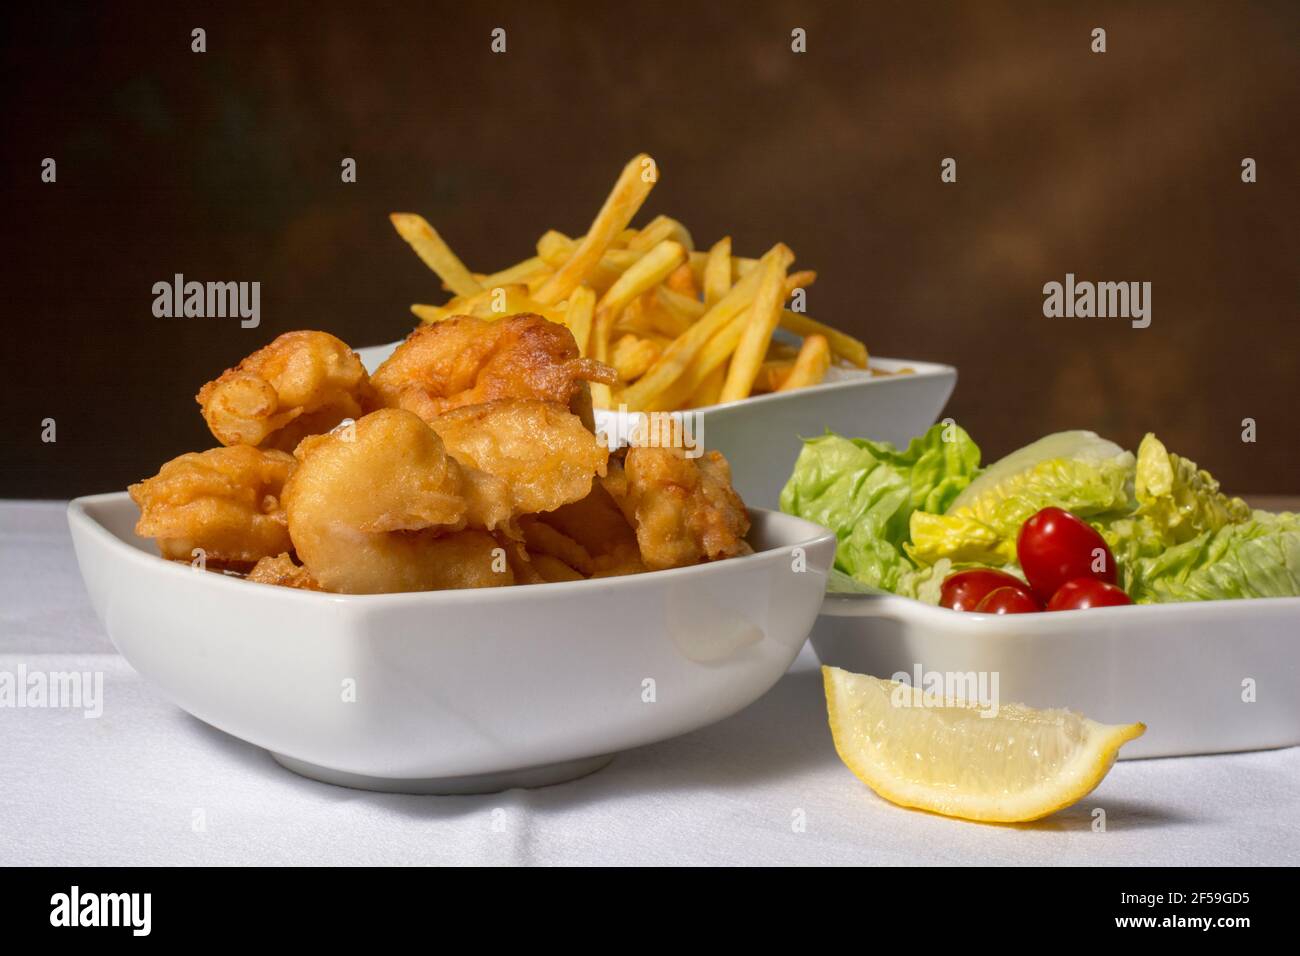 Deep fried scampi (prawns) in batter and chips with salad Stock Photo